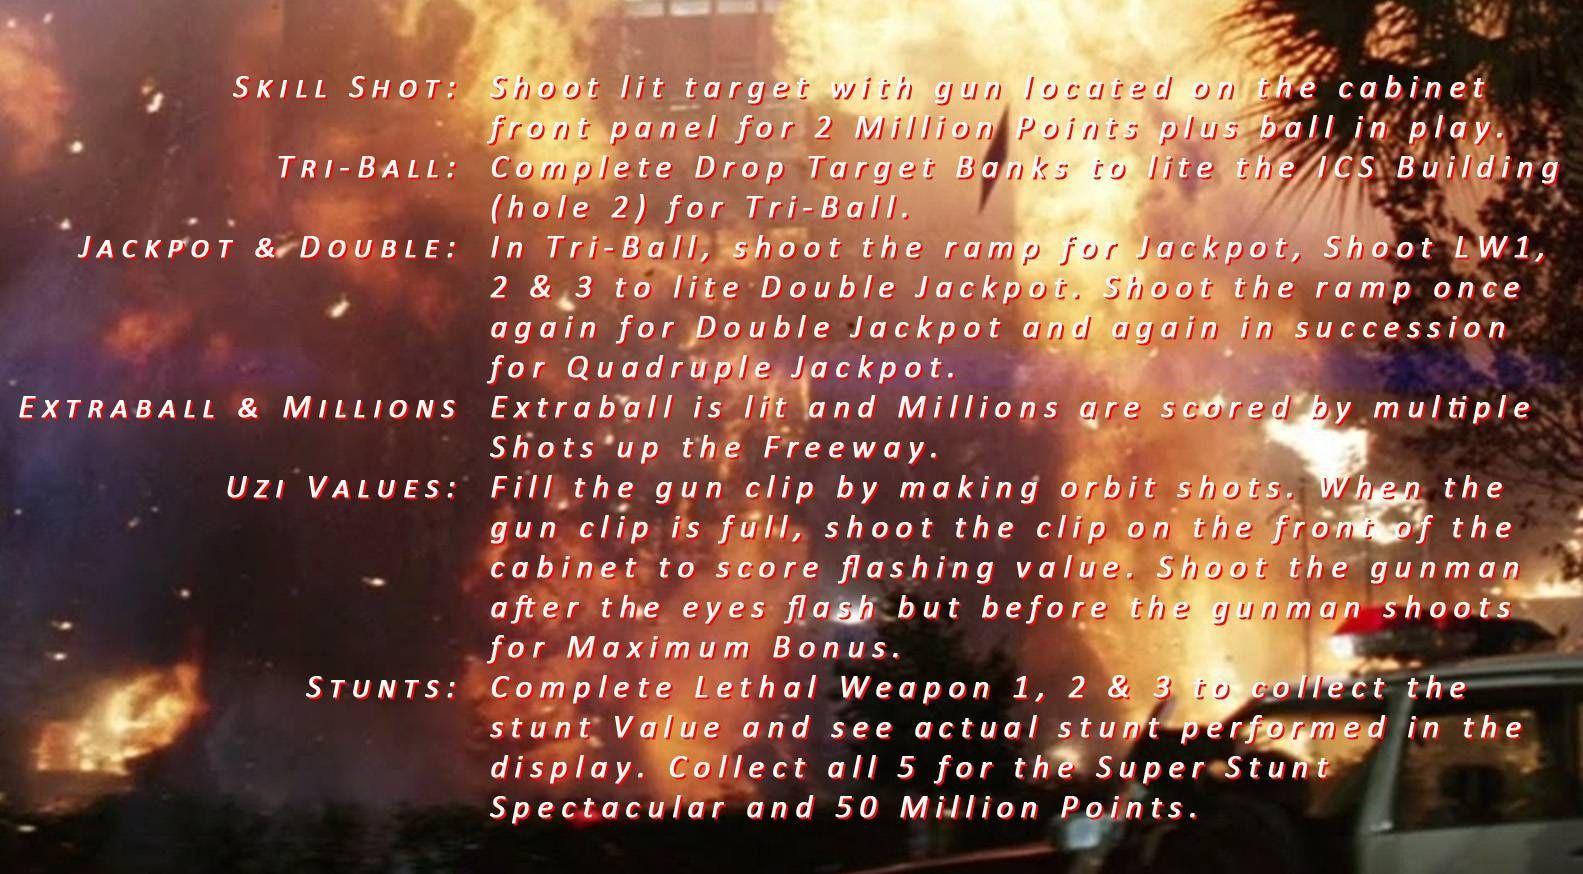 Lethal Weapon 3 instruction card